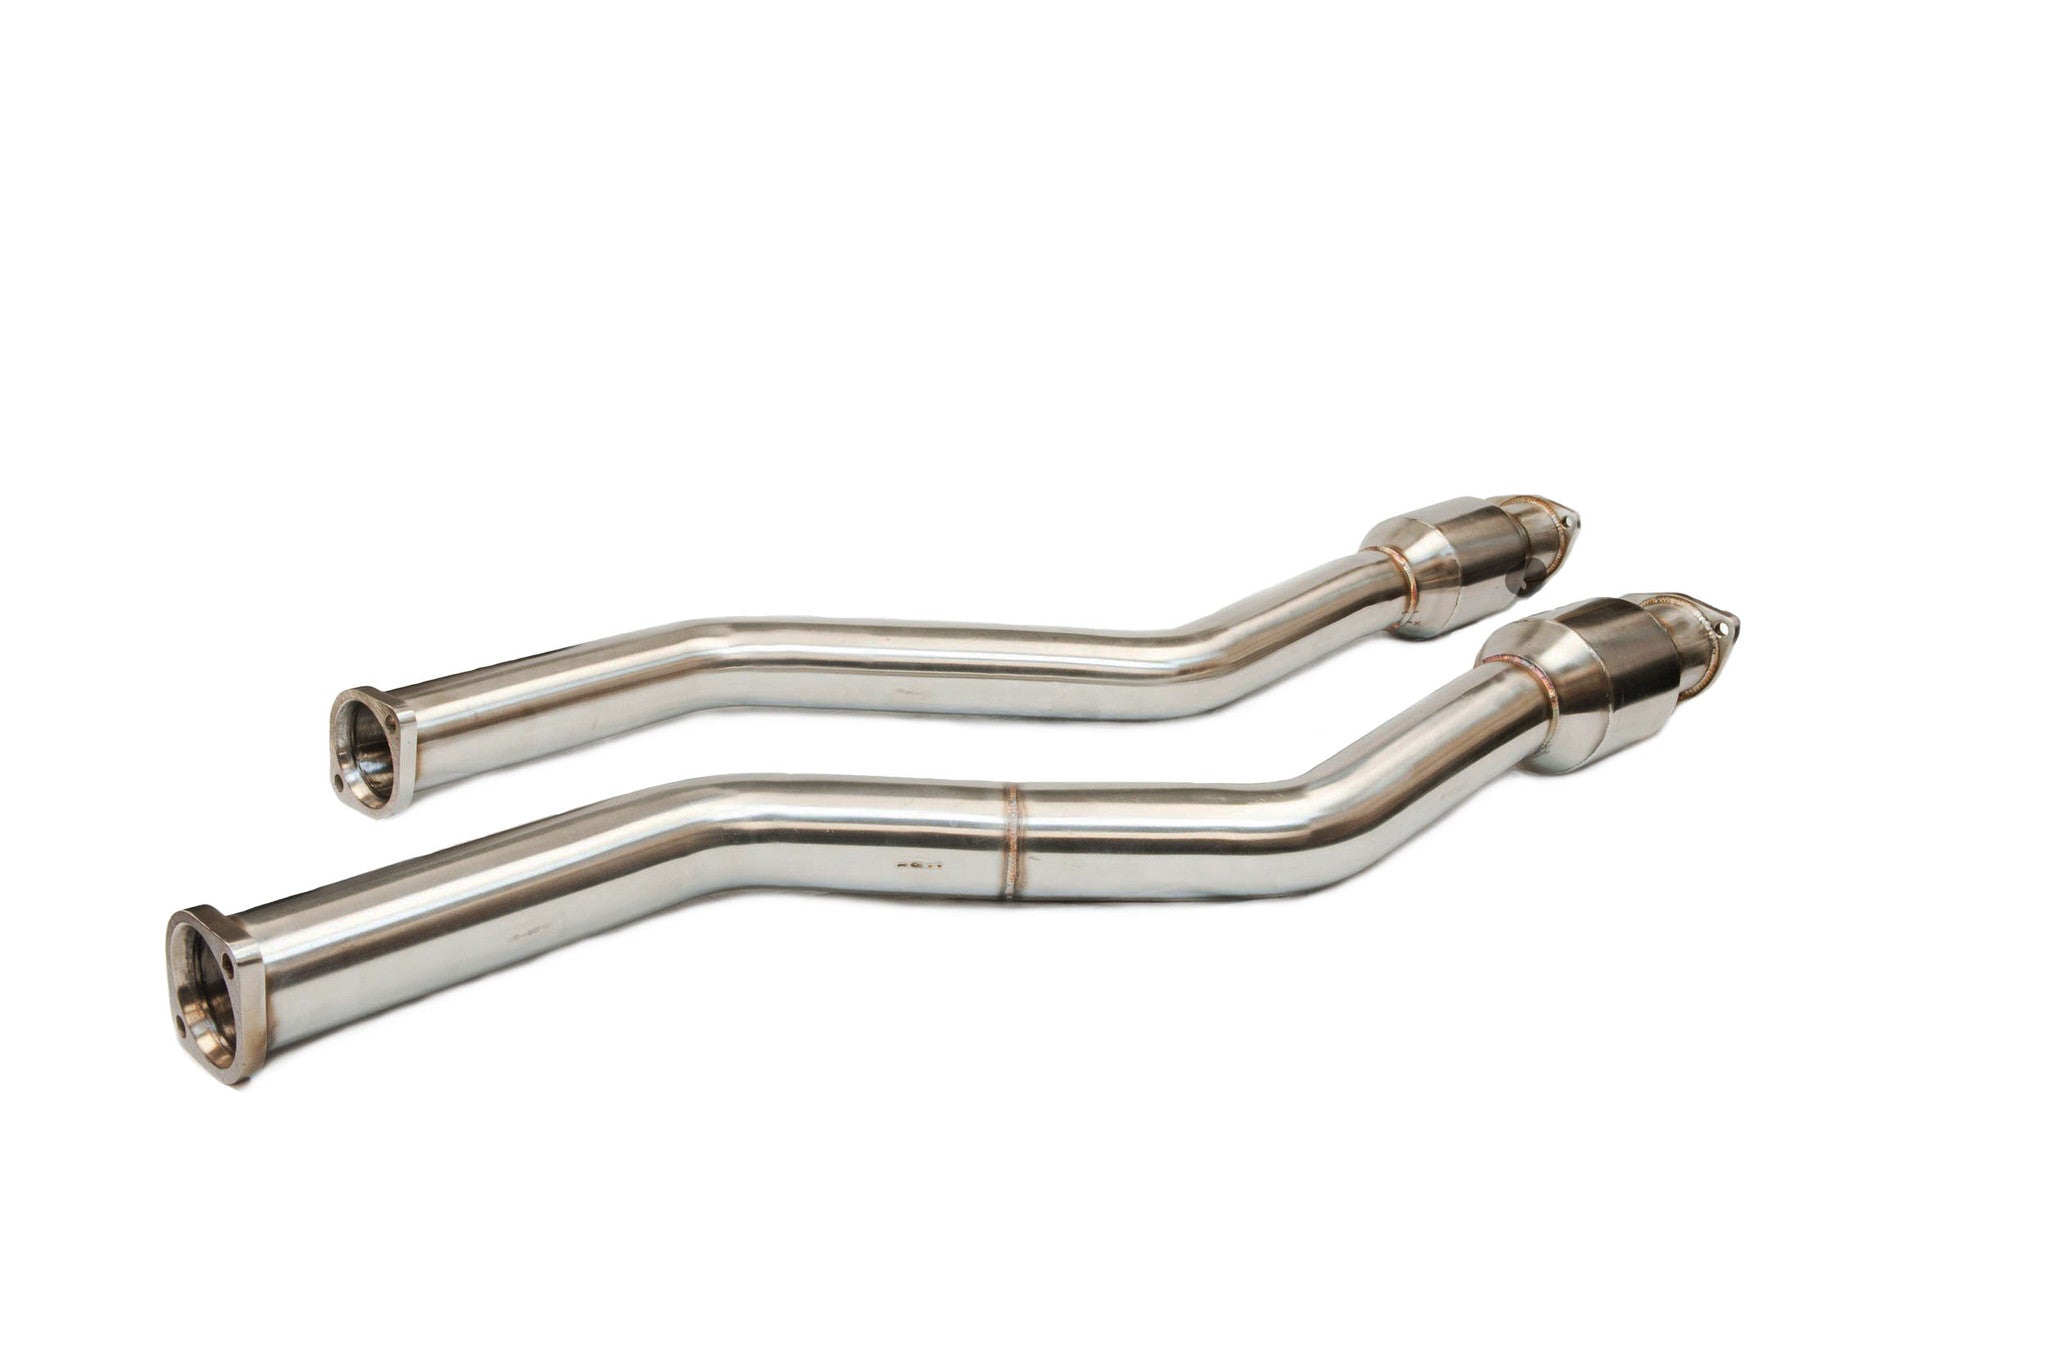 BMW E46 M3 Exhaust SECTION 1 with 100 CELL hi flow catalysts by 